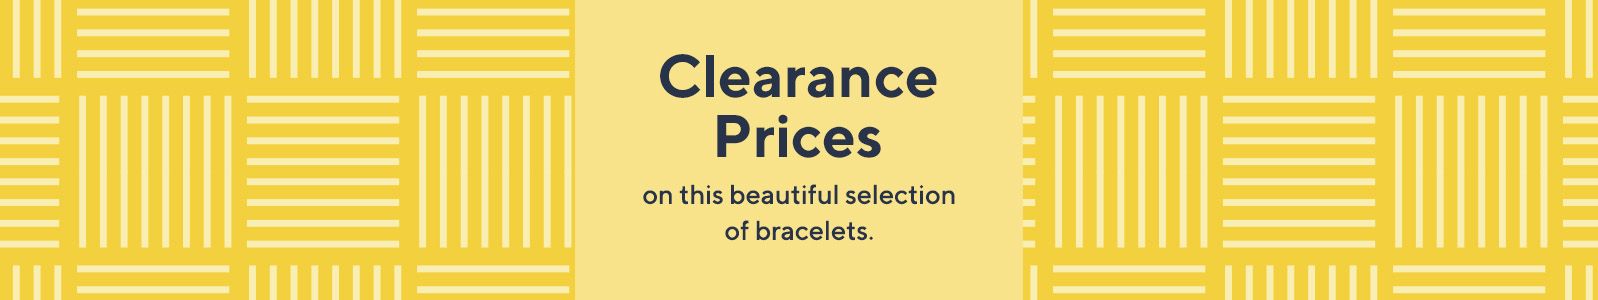 Clearance Prices on this beautiful selection of bracelets.